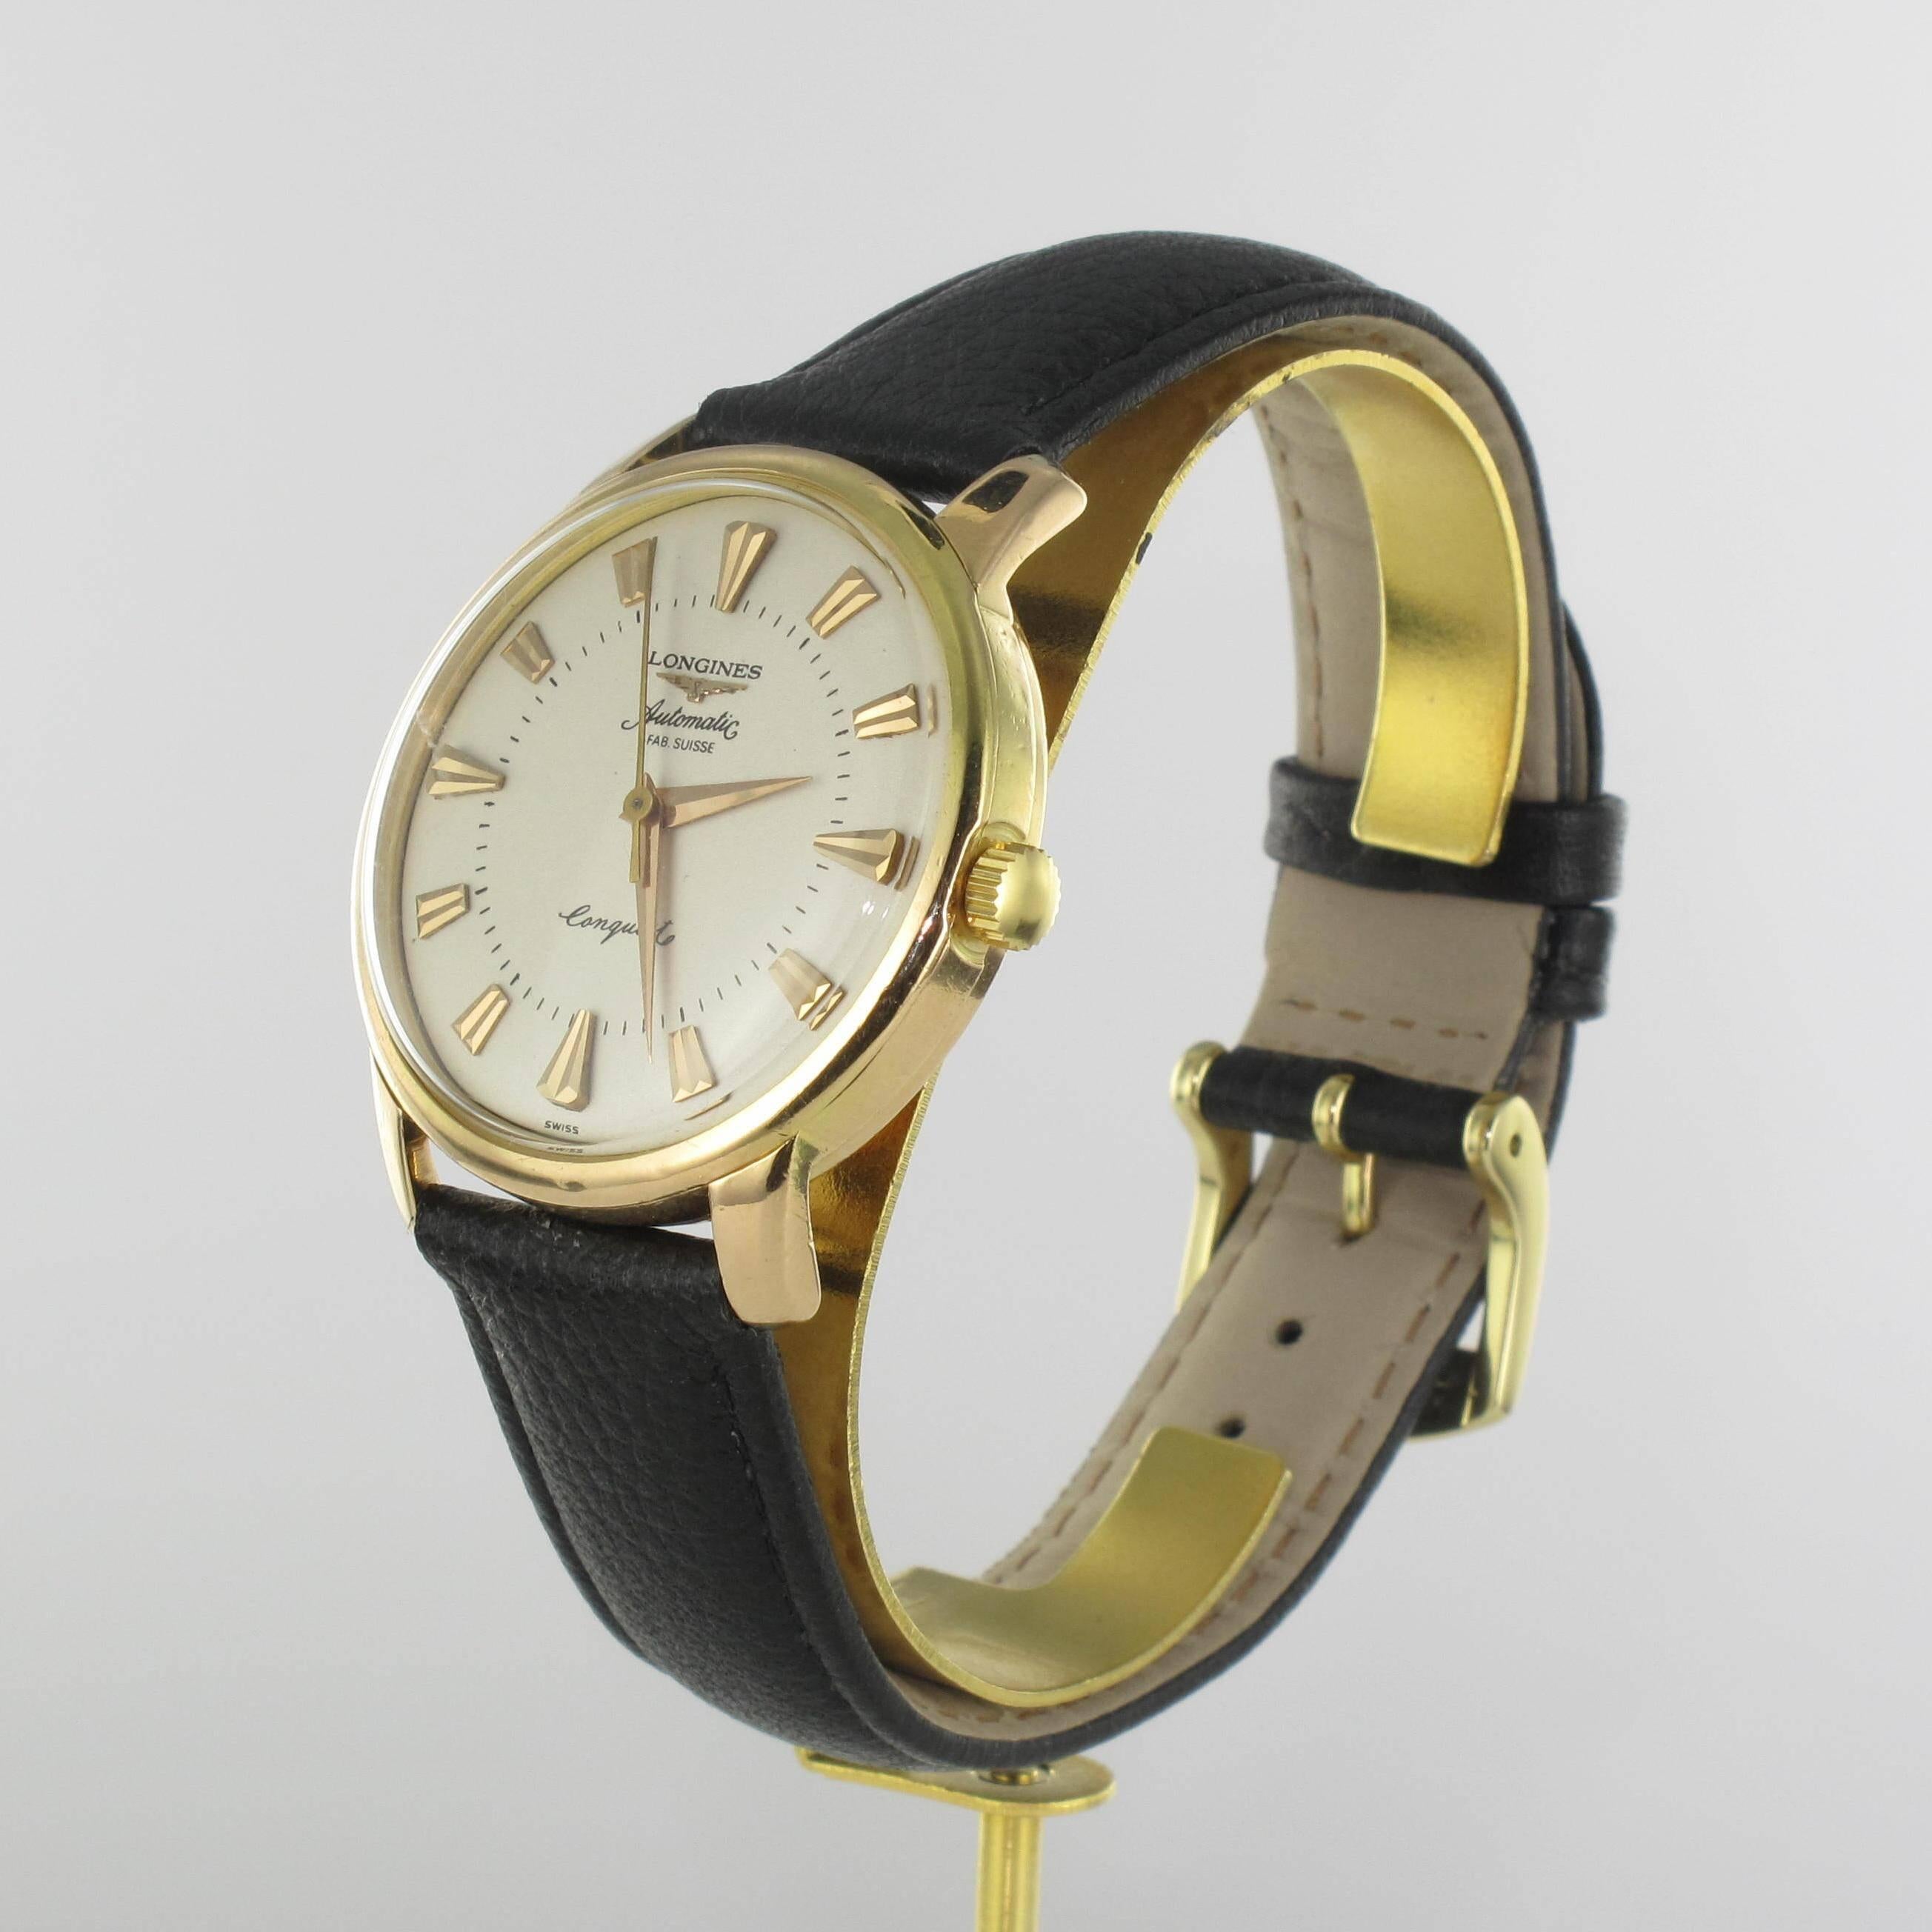 Longines Conquest Heritage.
Round yellow gold case, 18 carat, eagle head hallmark.
Mechanical hand-wound watch.
Impeccable background cream.
Diameter: 3.5 cm.
Men model.
New bracelet in black calf leather.
Authentic vintage watch - french